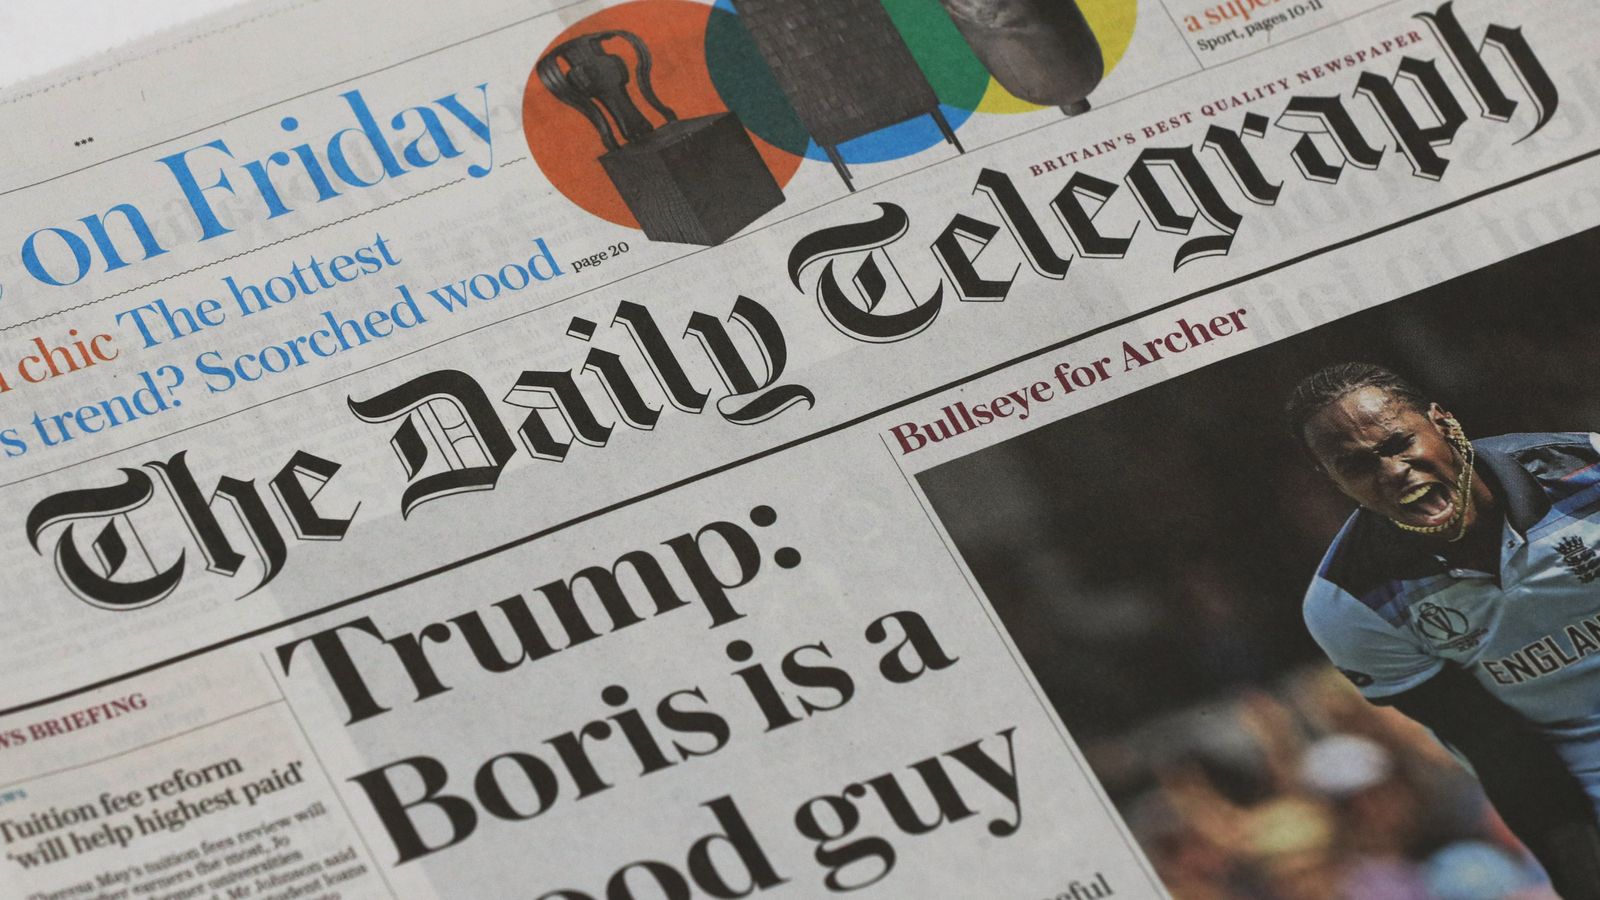 Wall Street Banks in Running to Buy Telegraph Newspapers